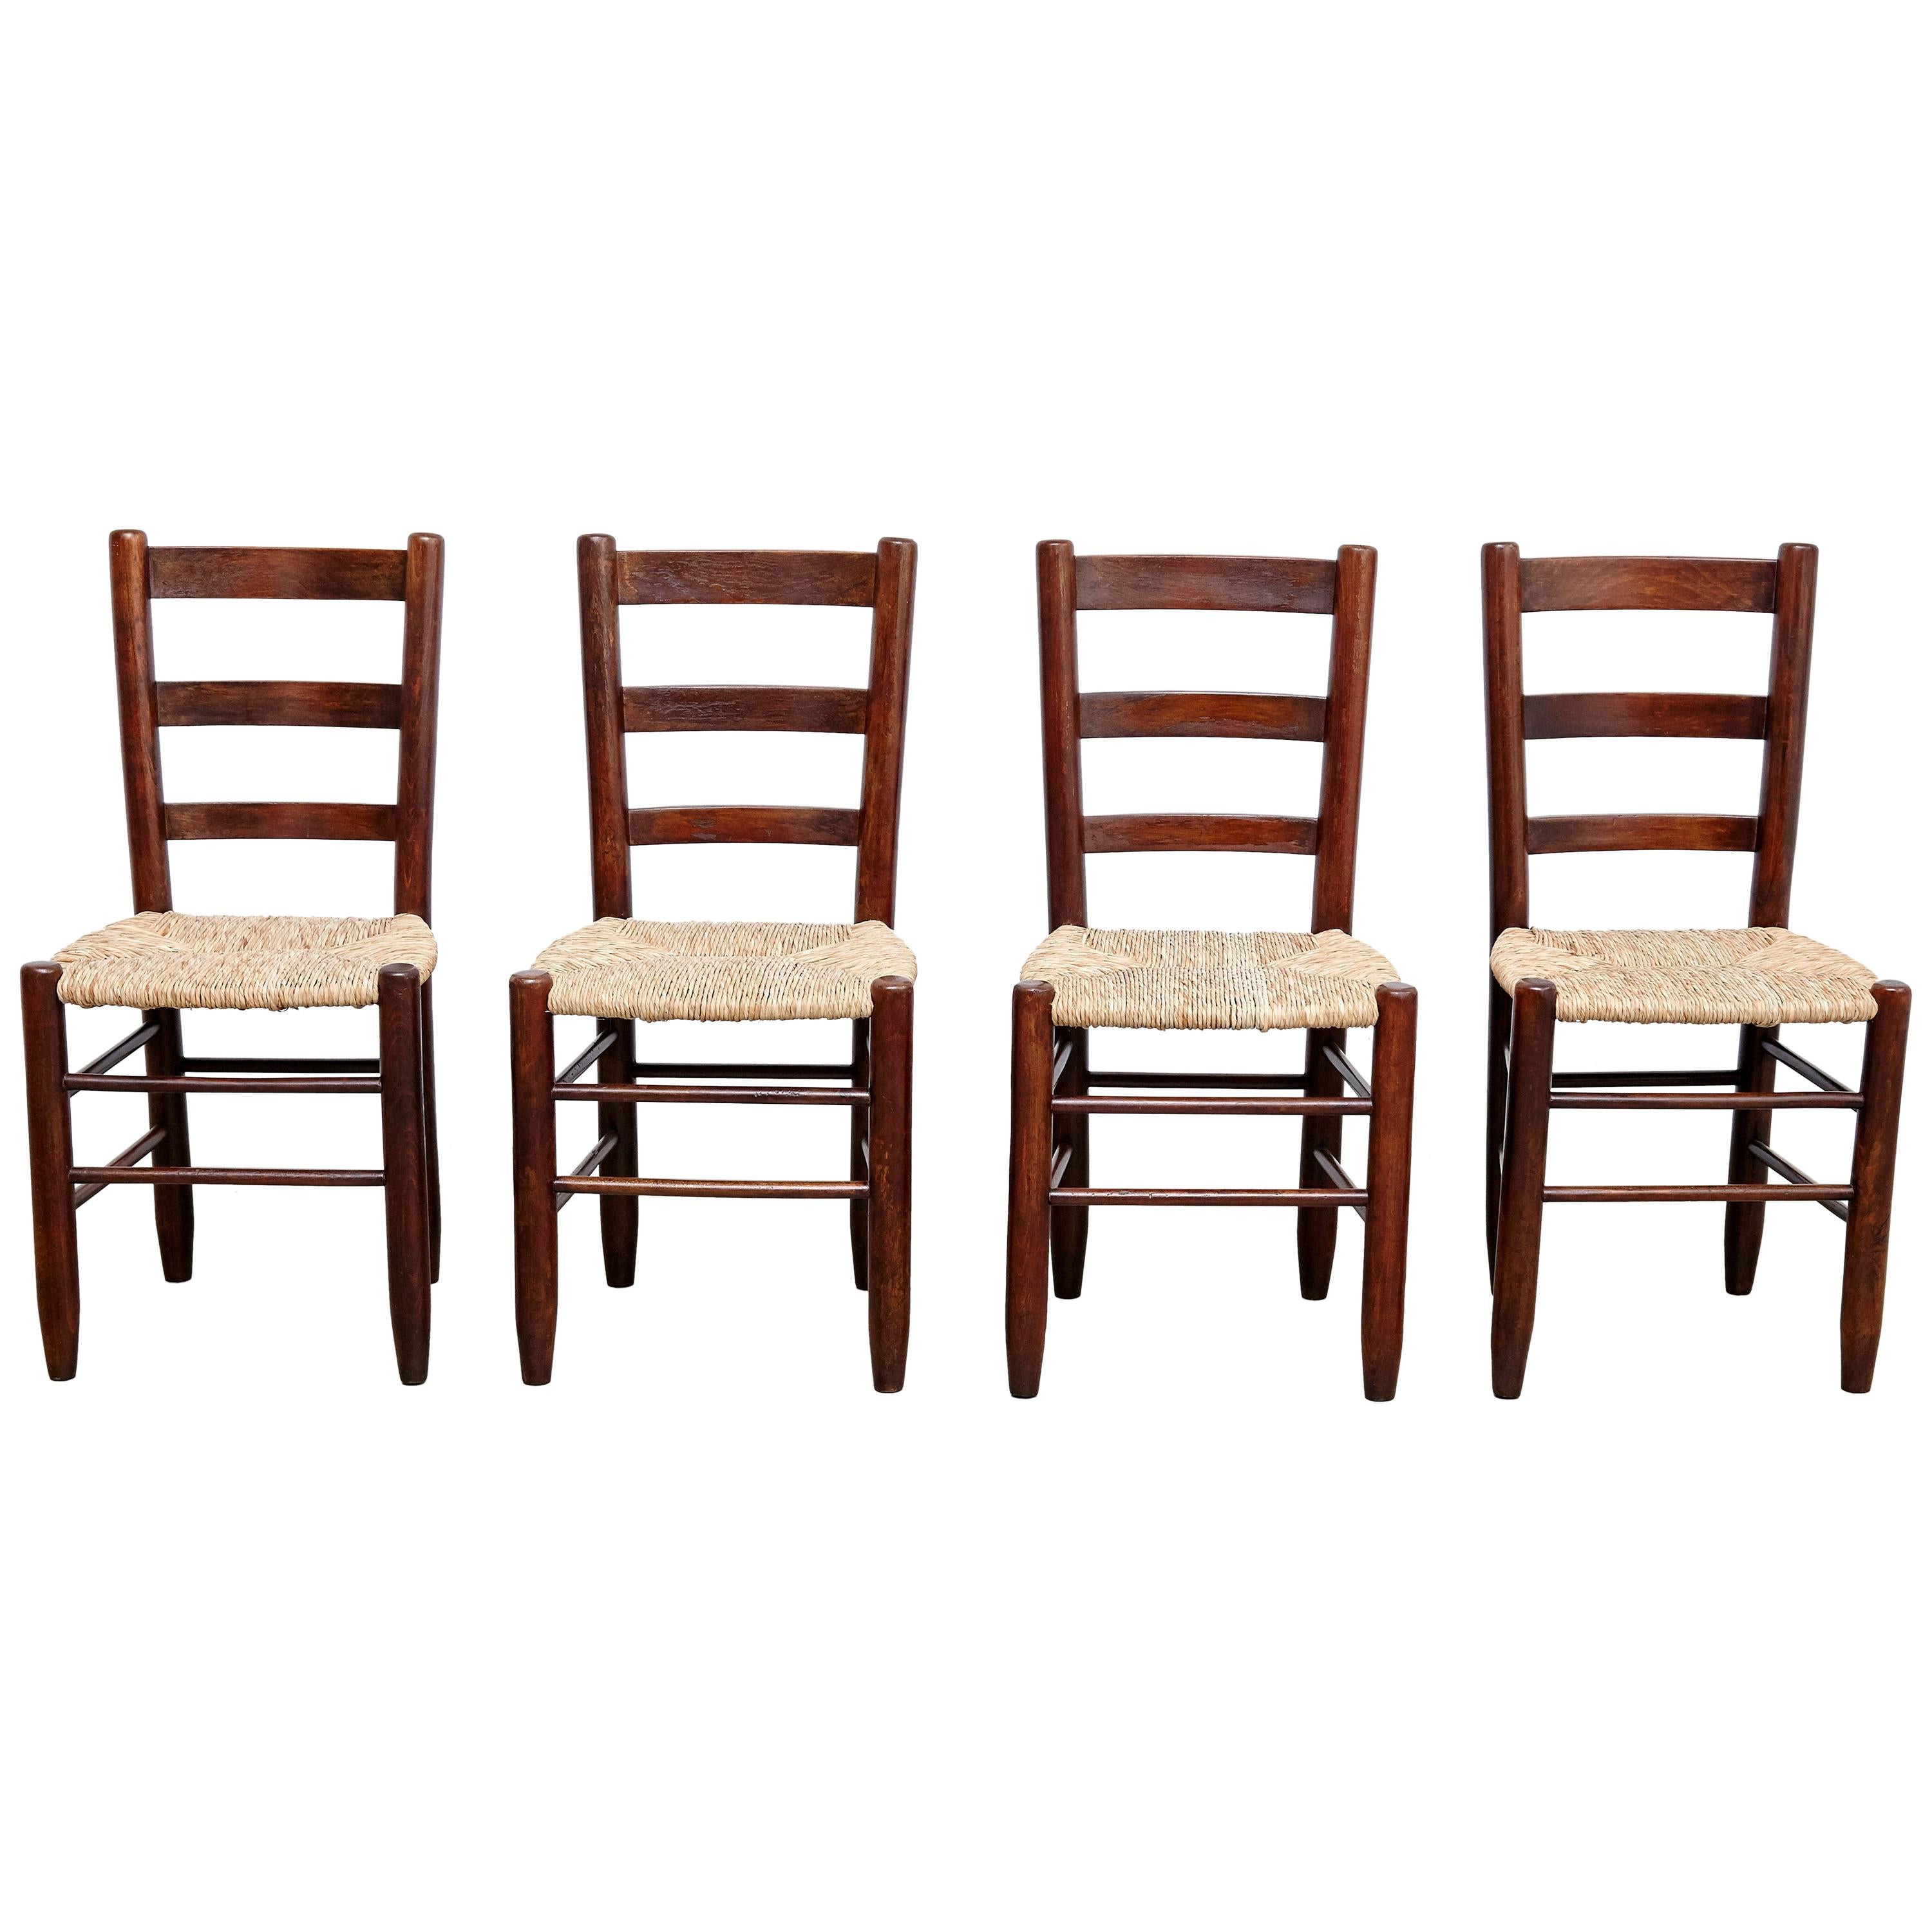 Set of Four Charlotte Perriand Mid-Century Modern Wood Rattan FrenchNº 19 Chairs